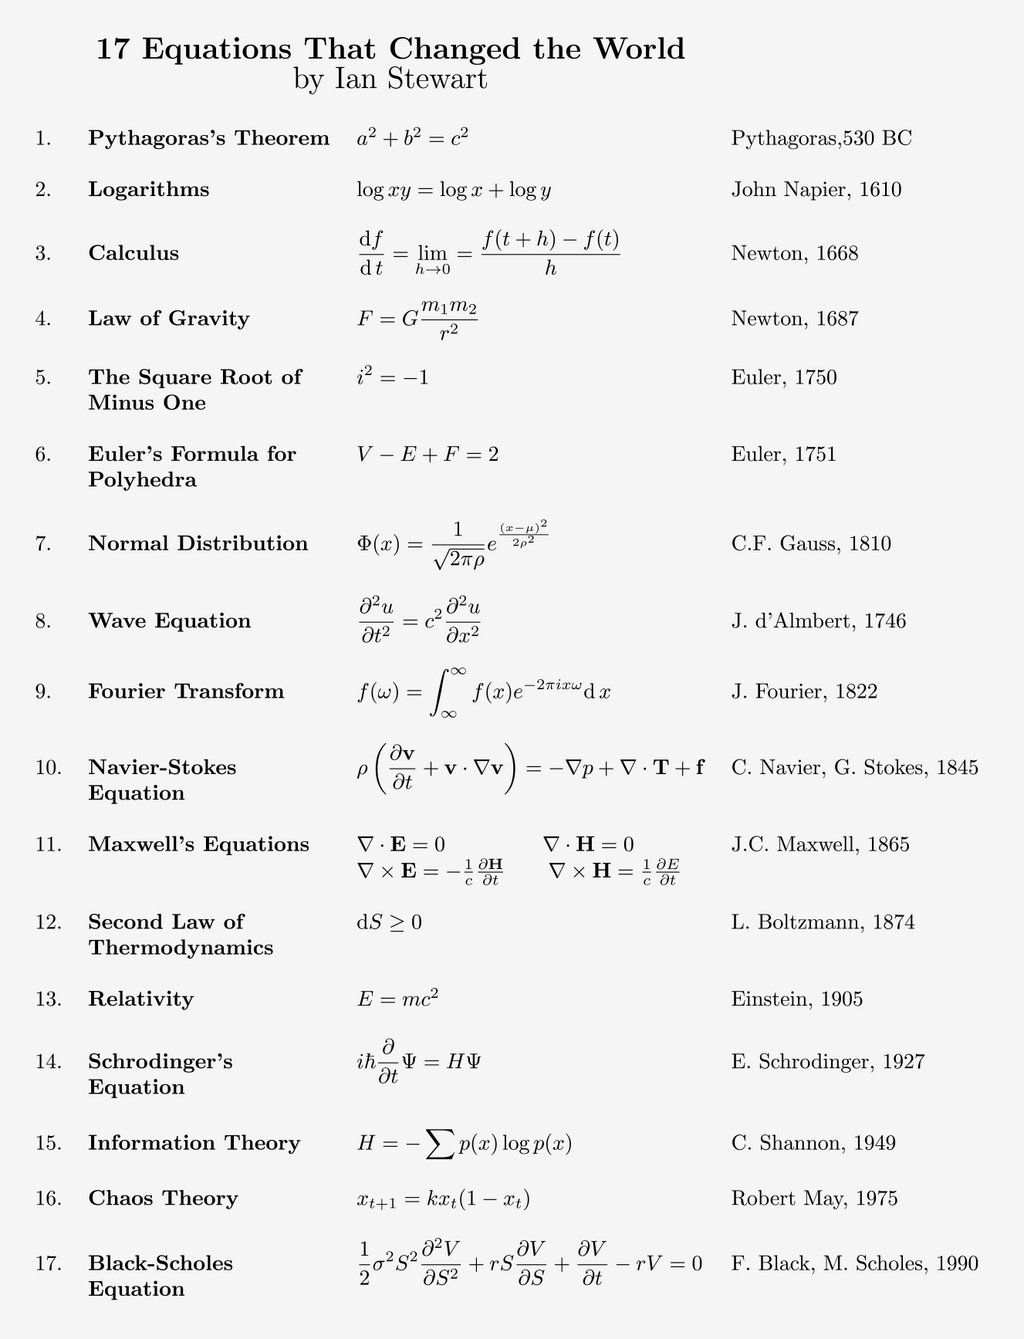 17 equations that changed the world (Ian Stewart)